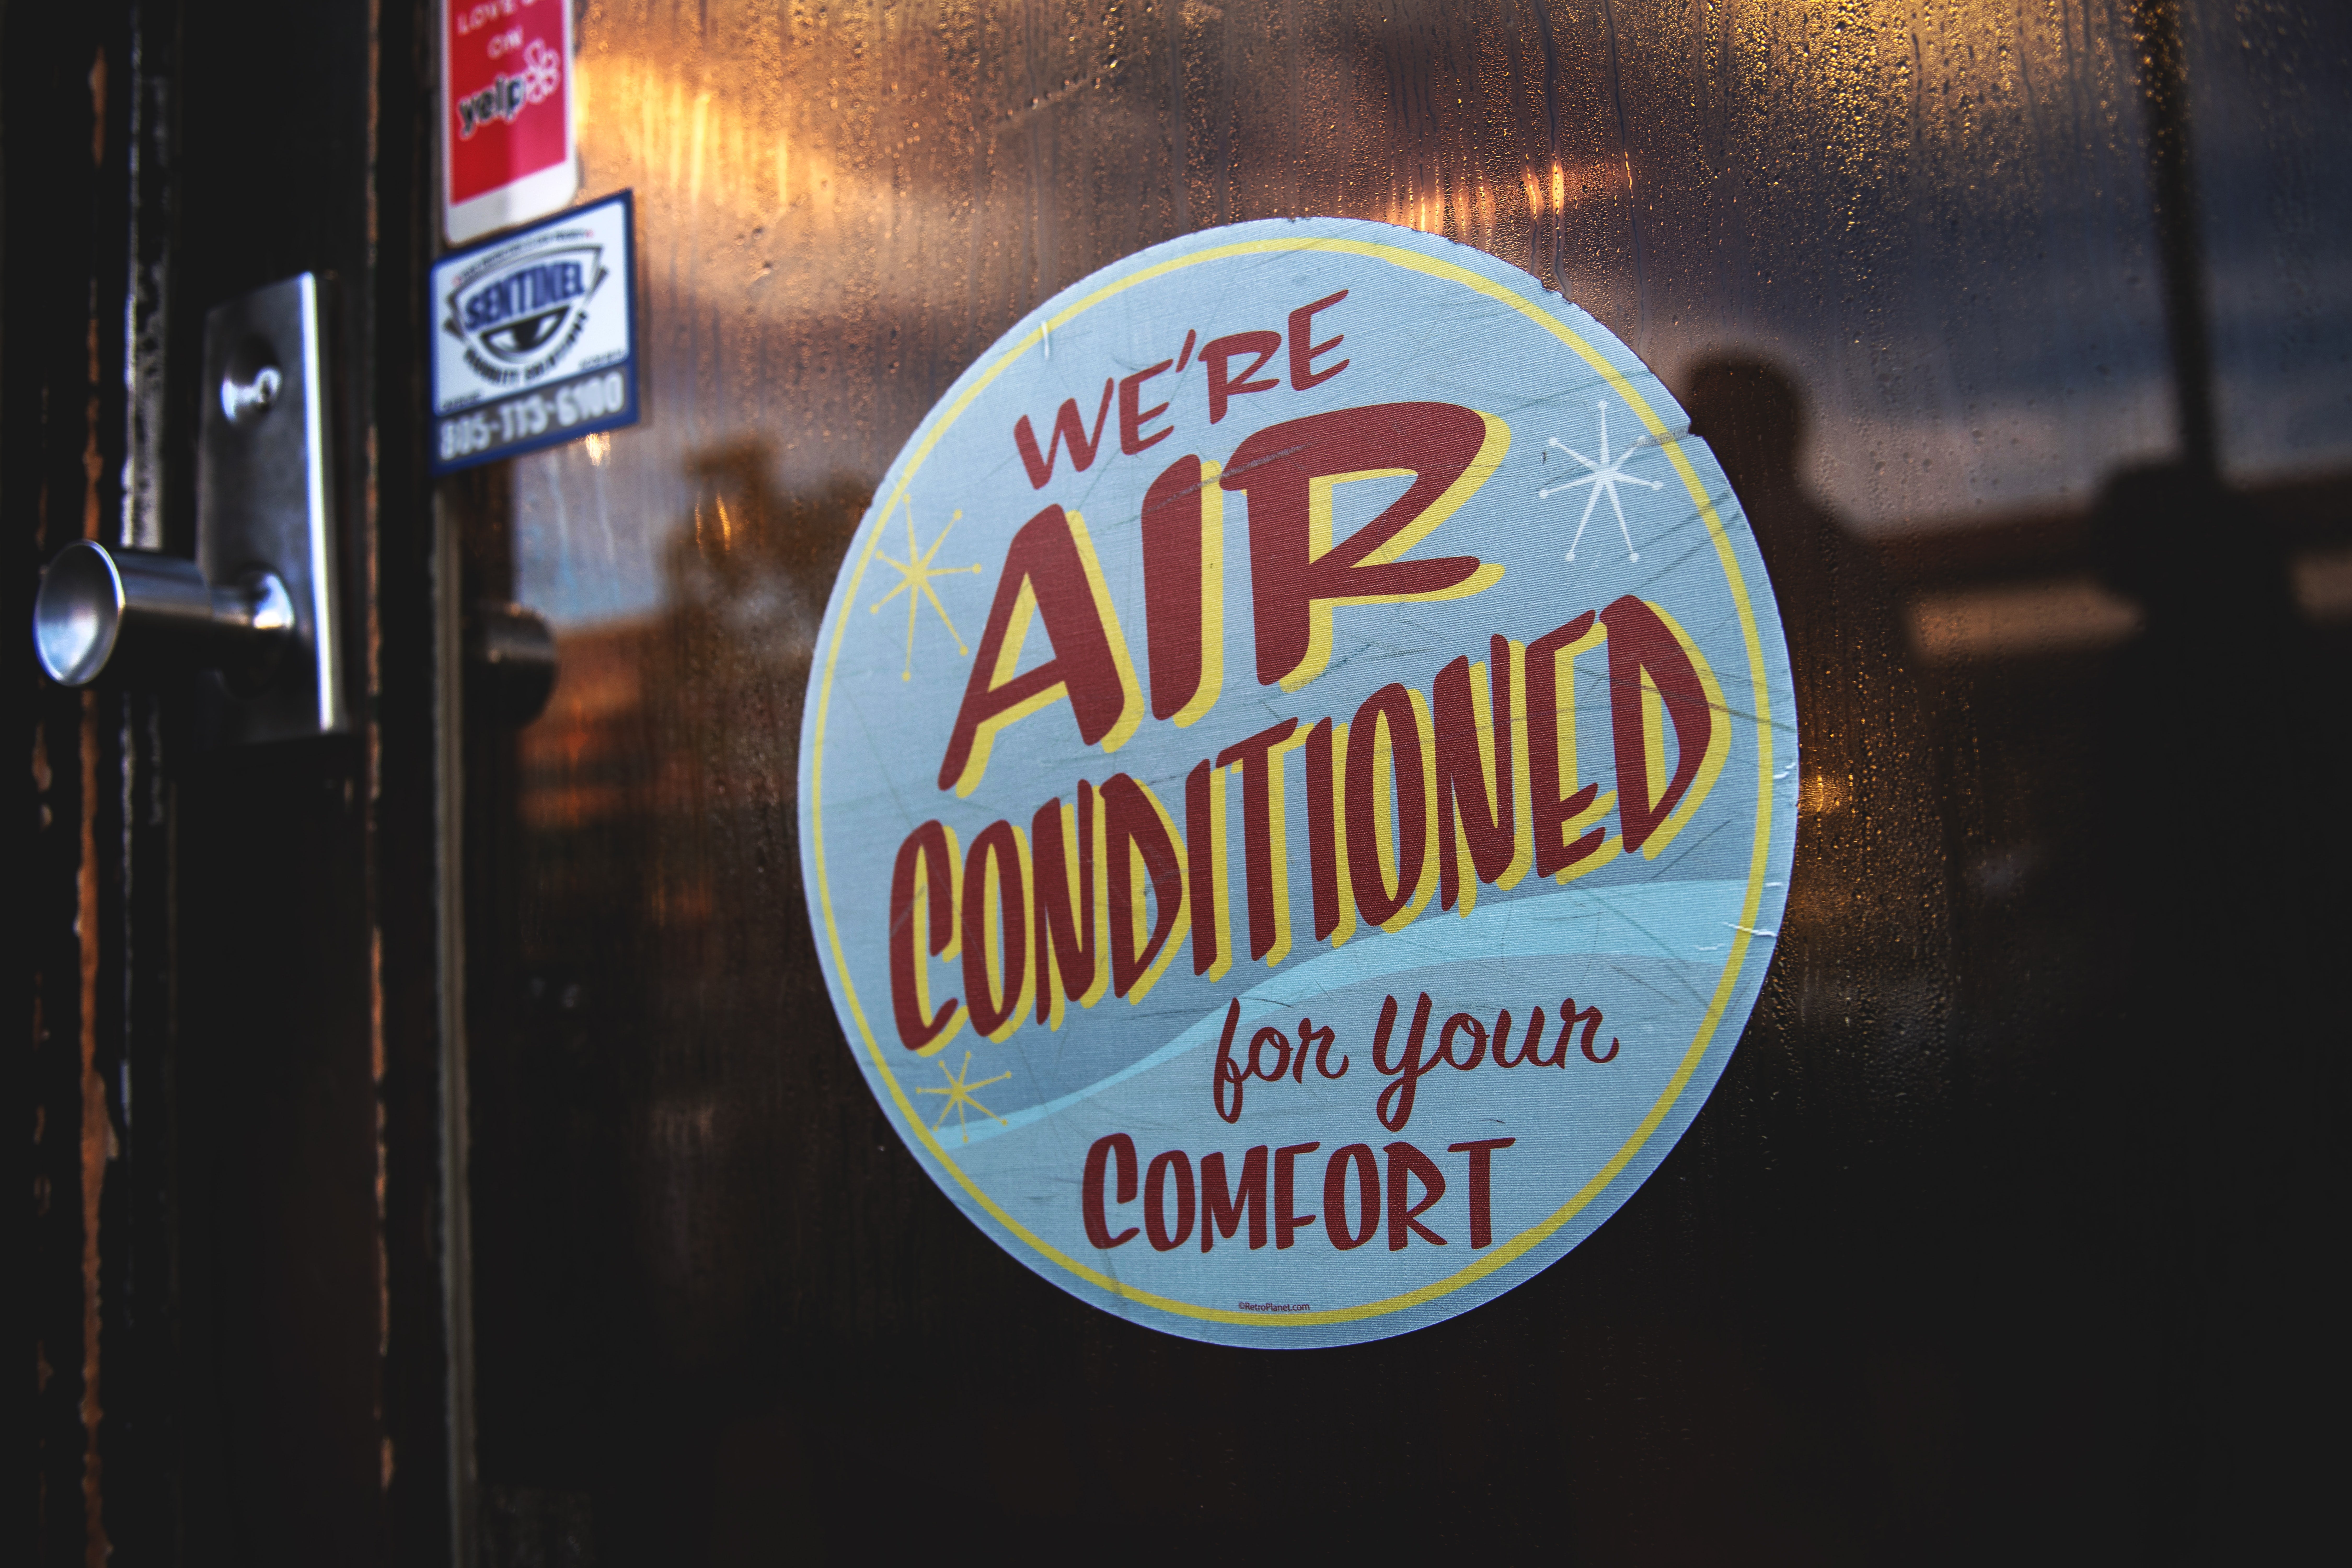 A sign on a door says "We're air conditioned for your comfort."